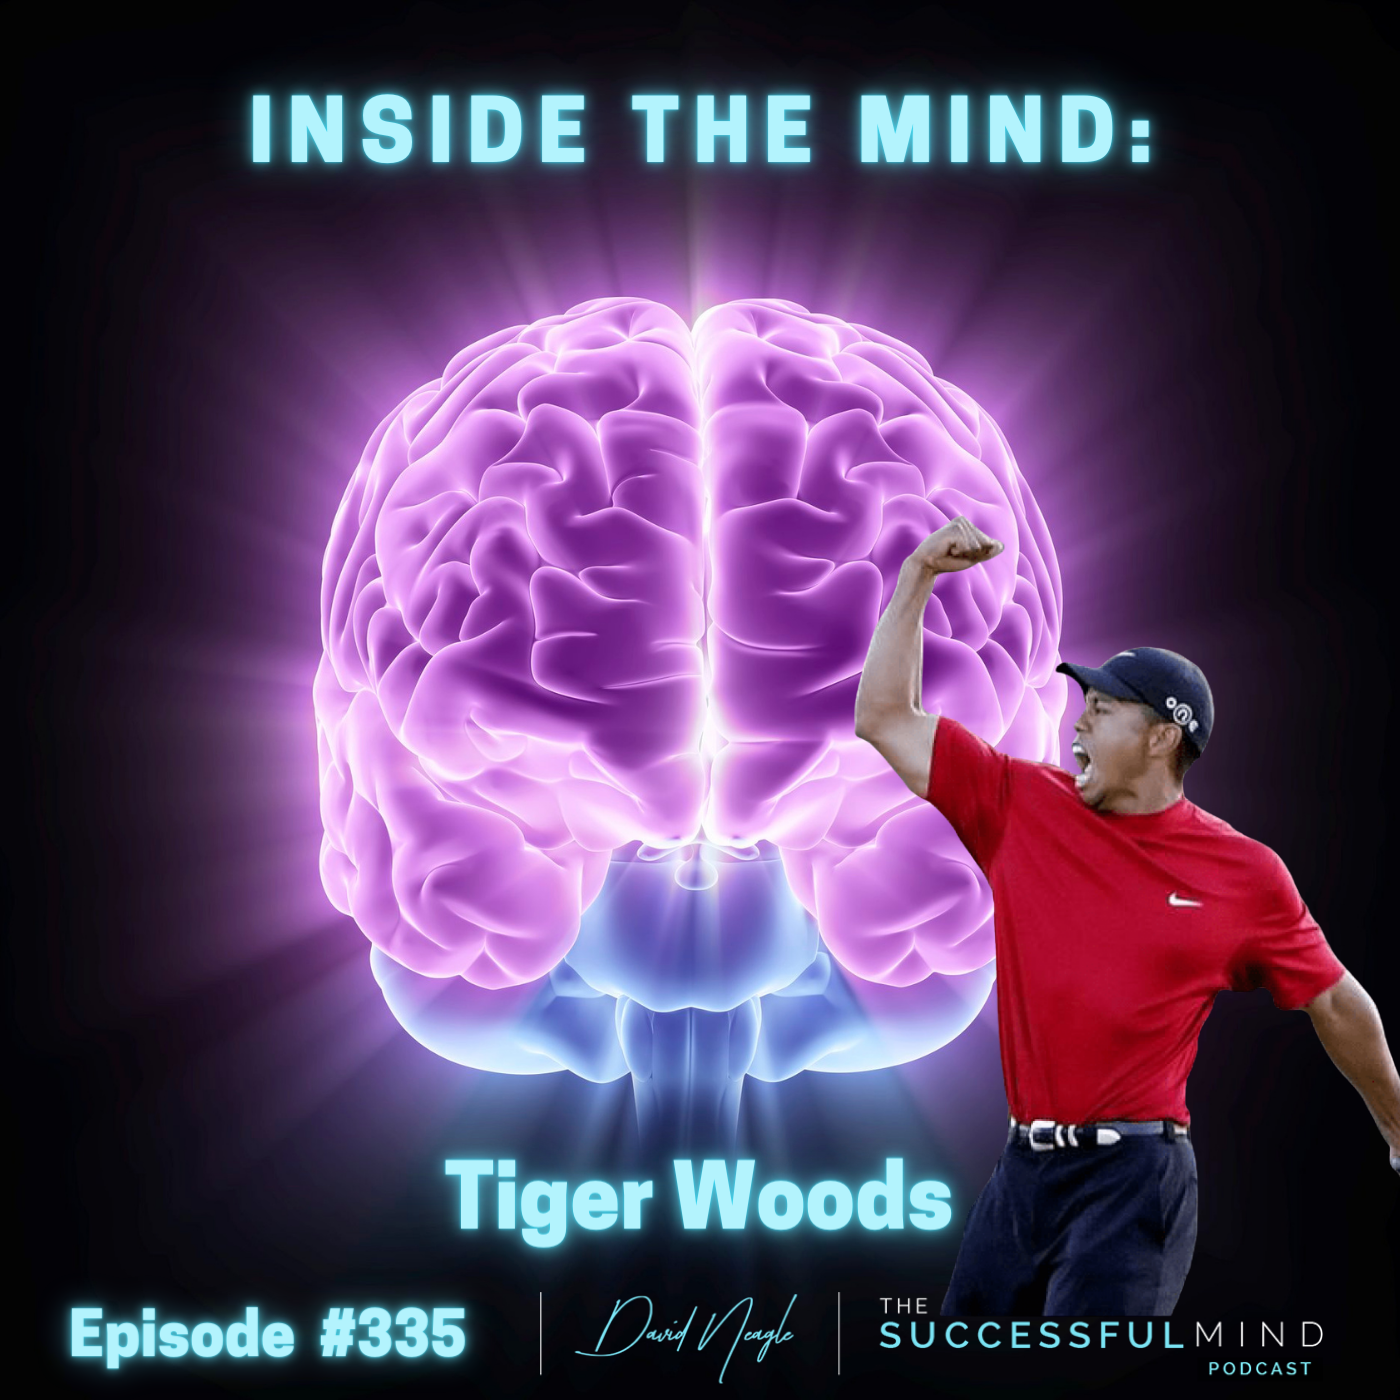 The Successful Mind Podcast – Episode 335 – Inside The Mind: Tiger Woods